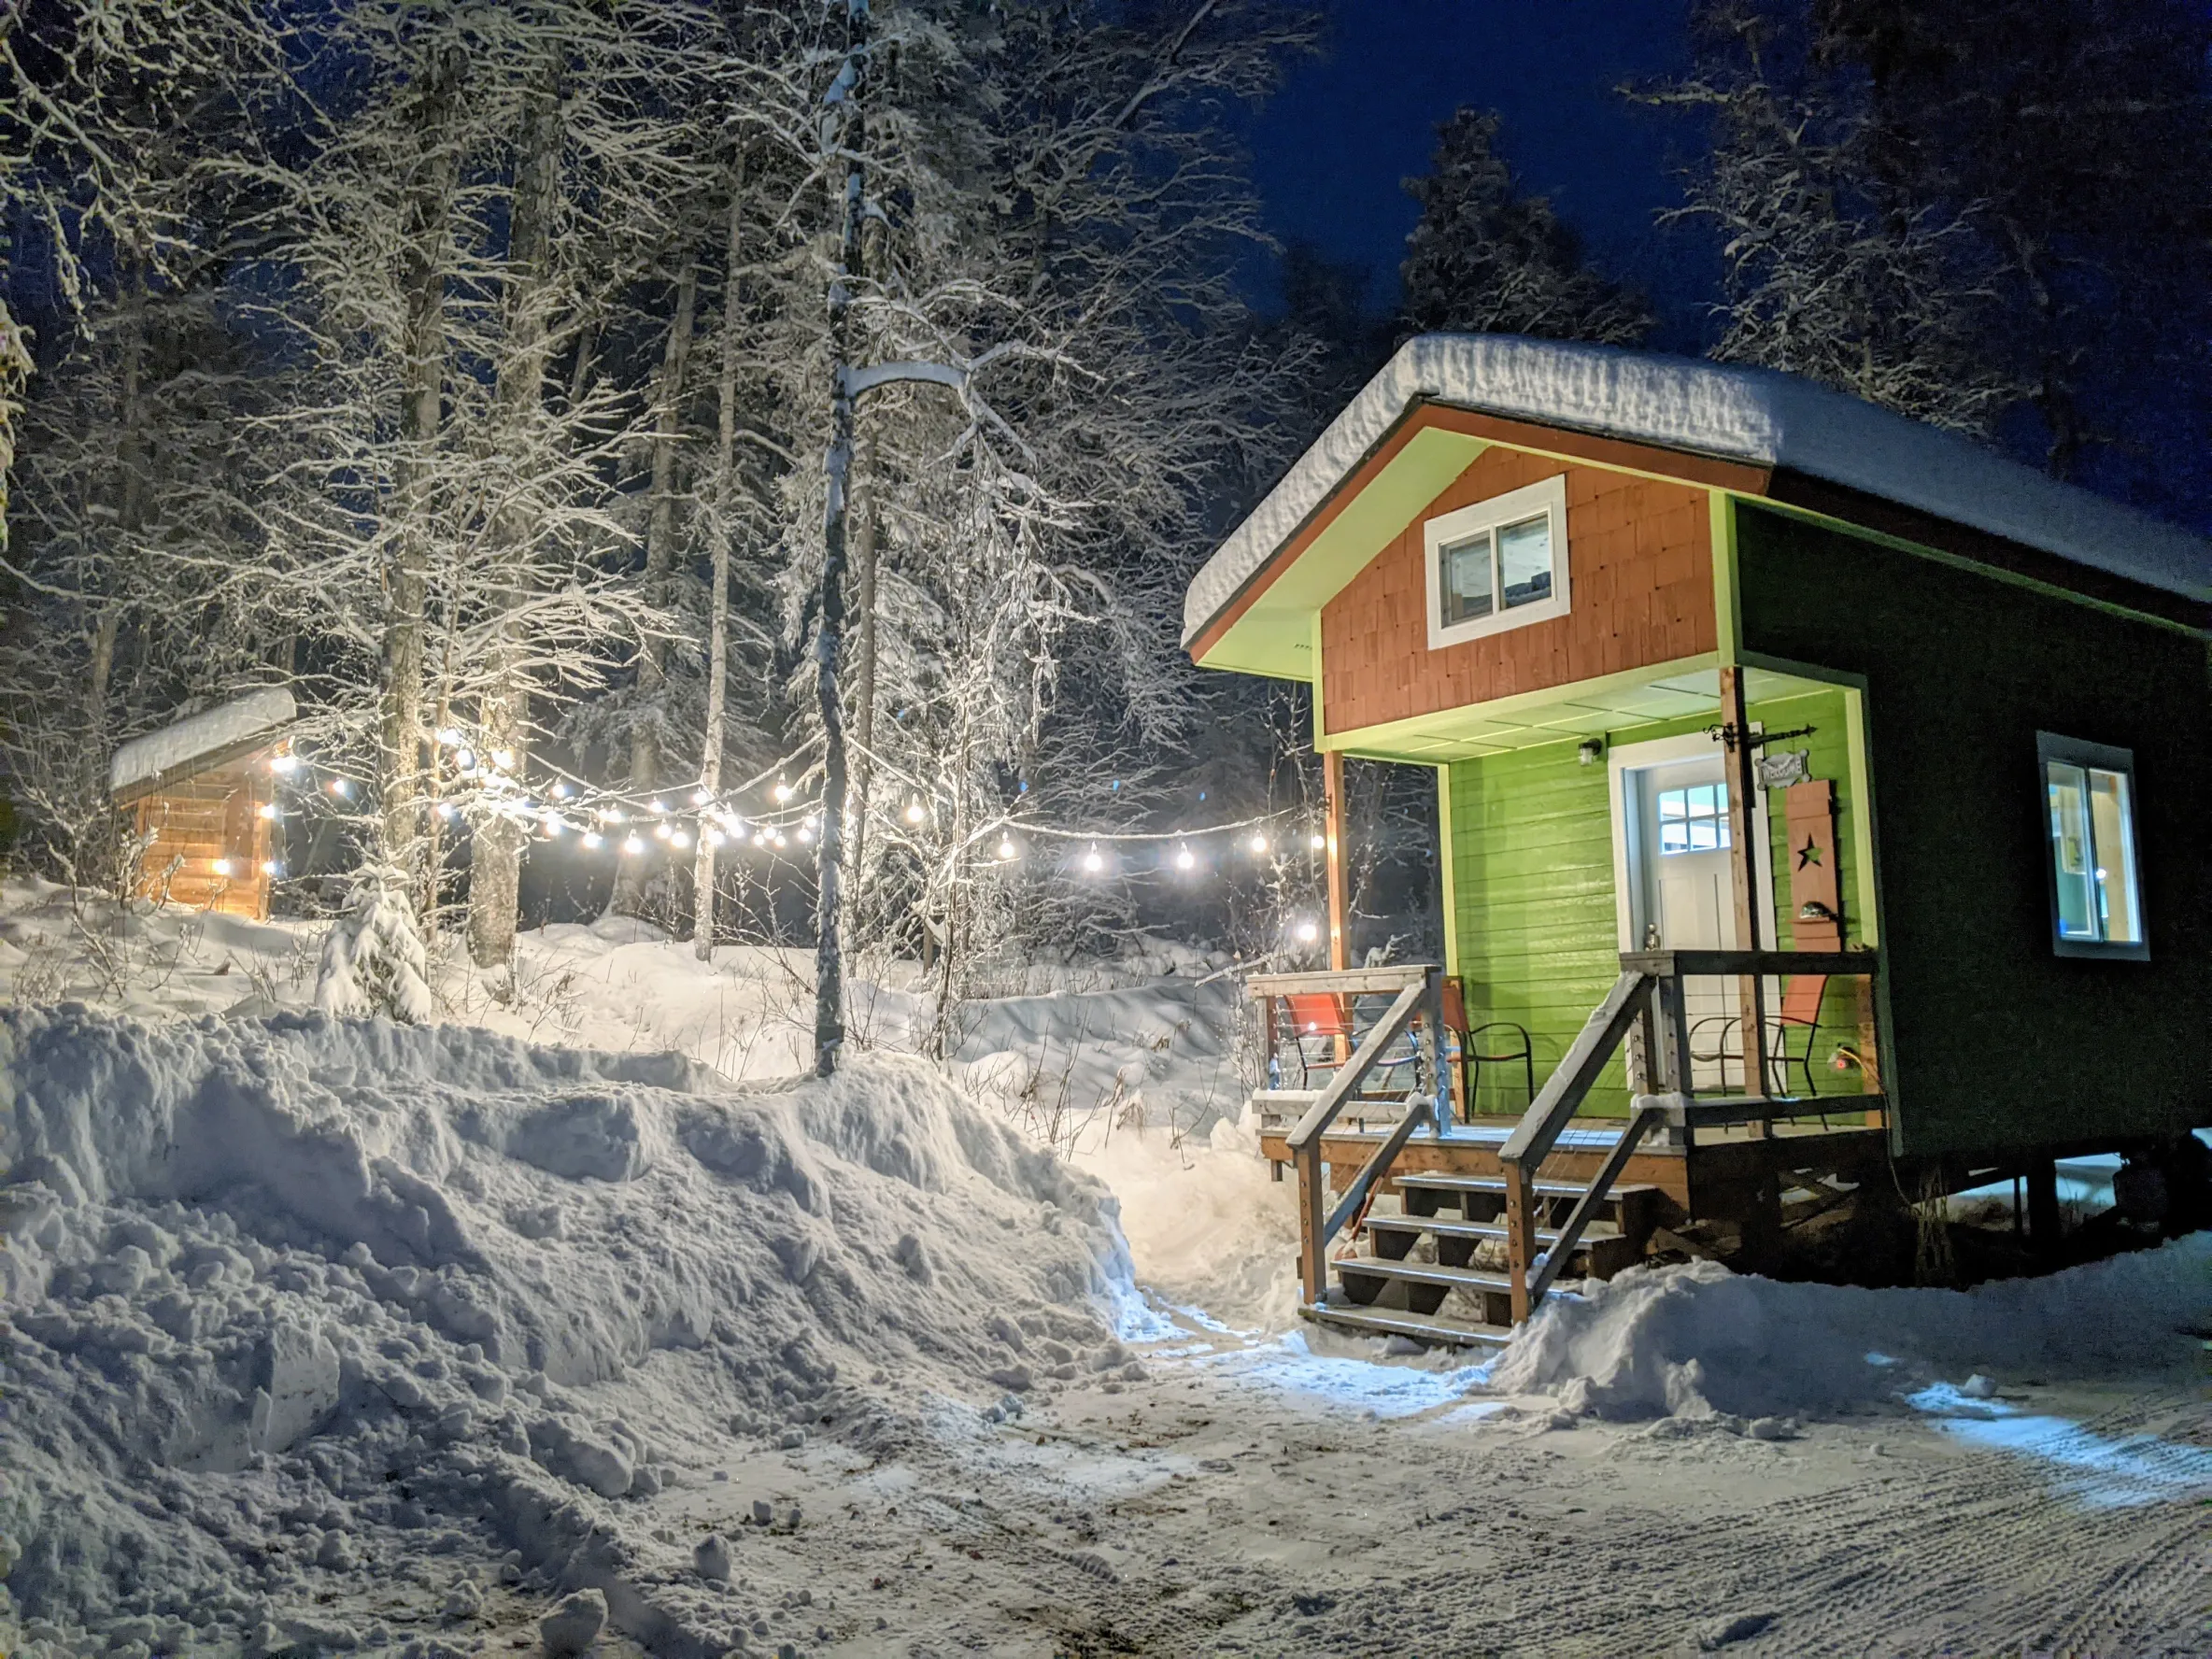 Well-light two-story, tiny home cabin with a wooden step porch; the lower level is green and the house is surrounded by snowy ground and bright festive lights strung in the trees